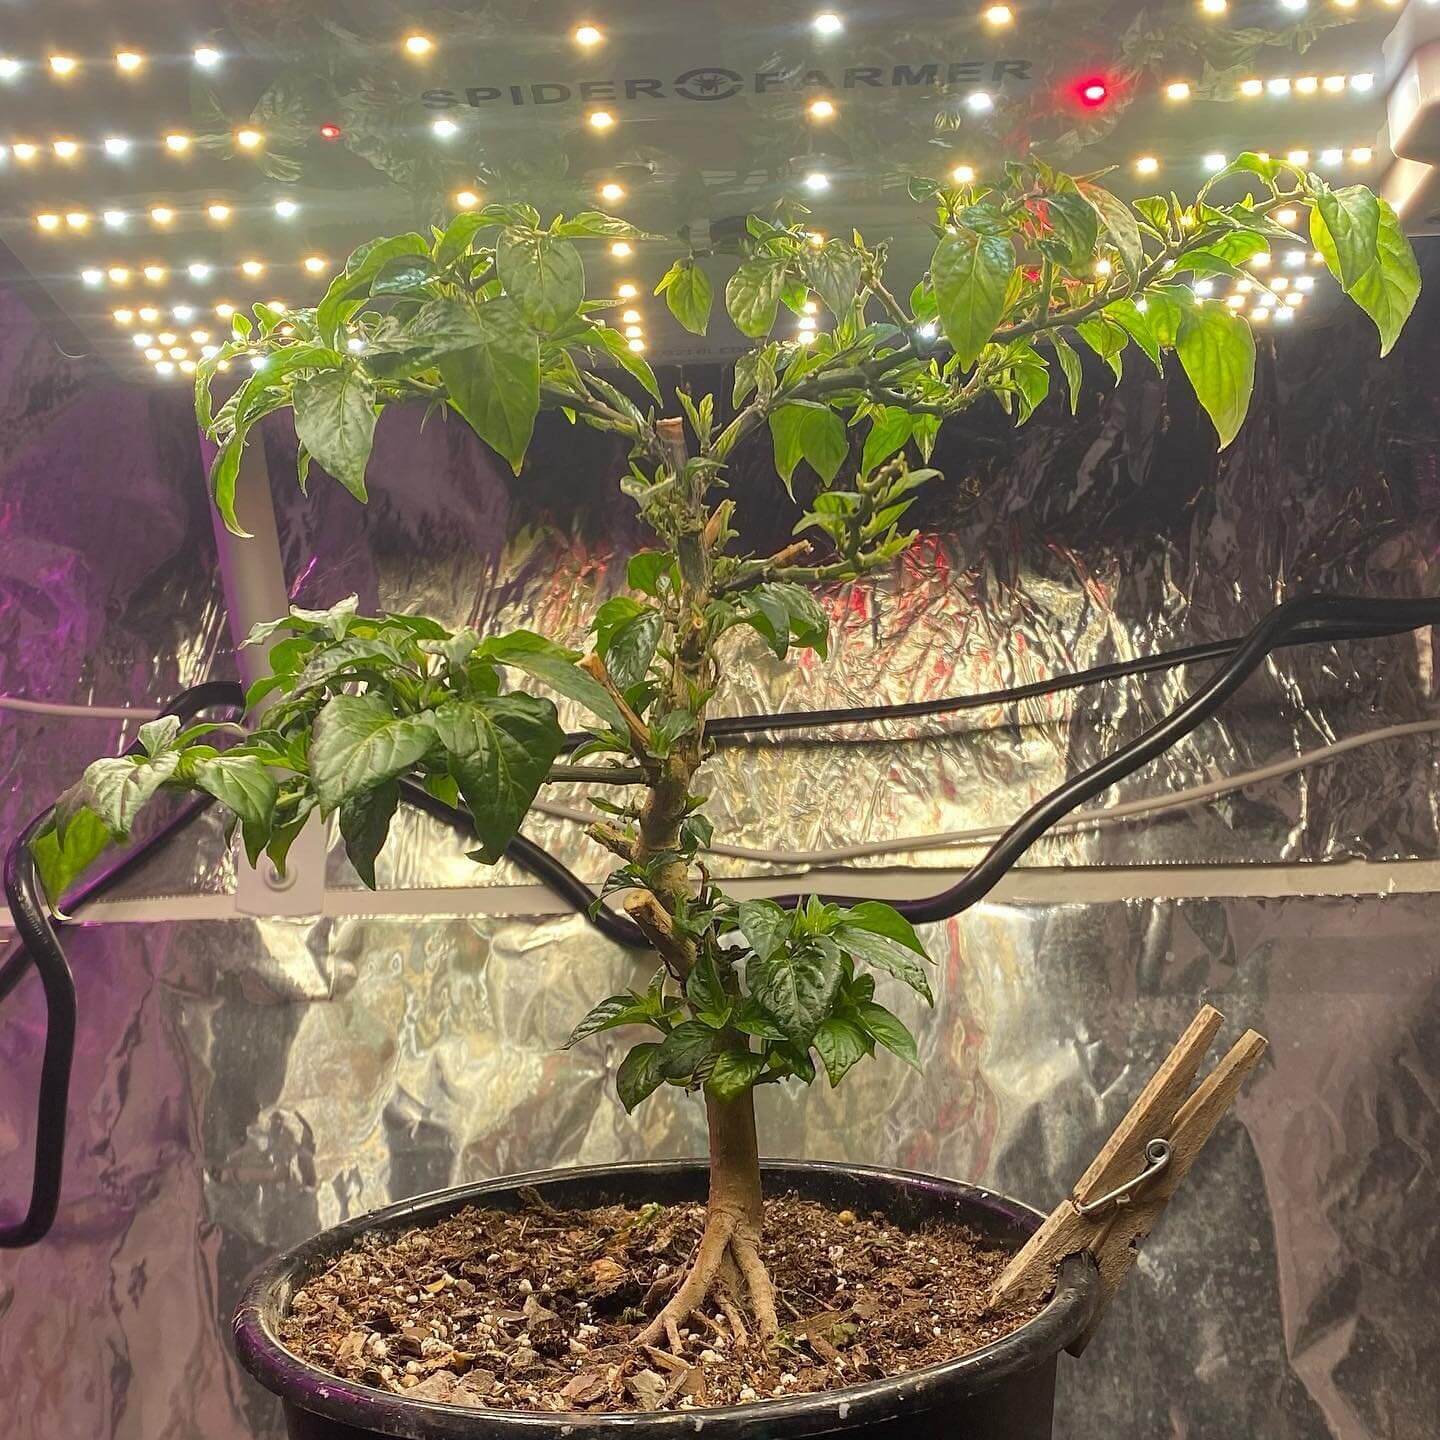 ig@capsaicincultThis one is gonna be a beast once it gets outside!!